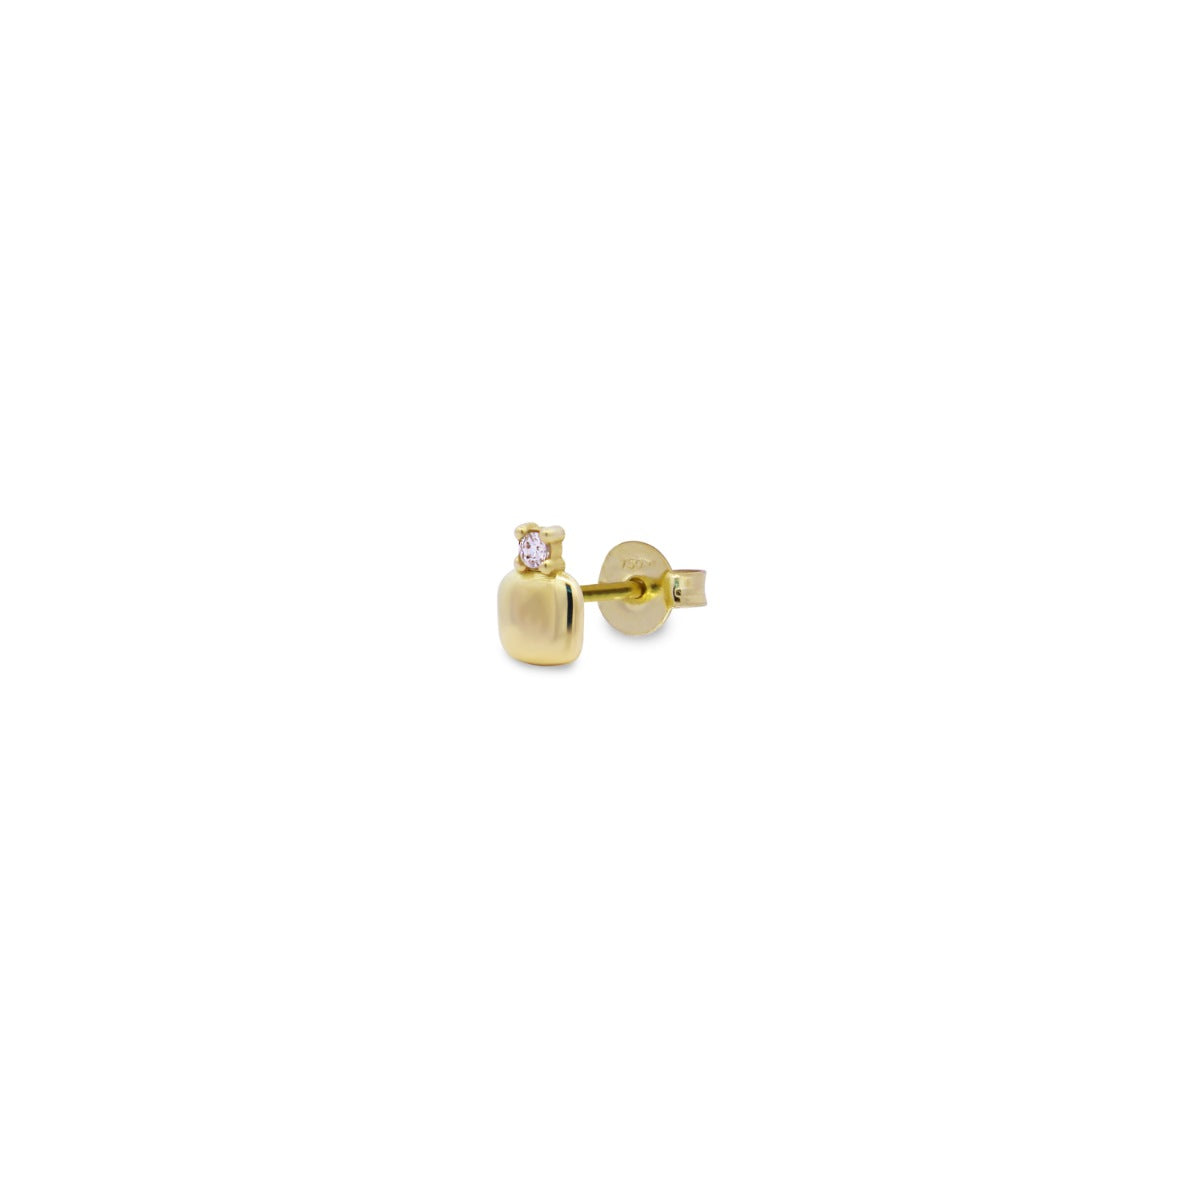 Single earring with smooth square lobe and lab-grown diamond - ORO18KT